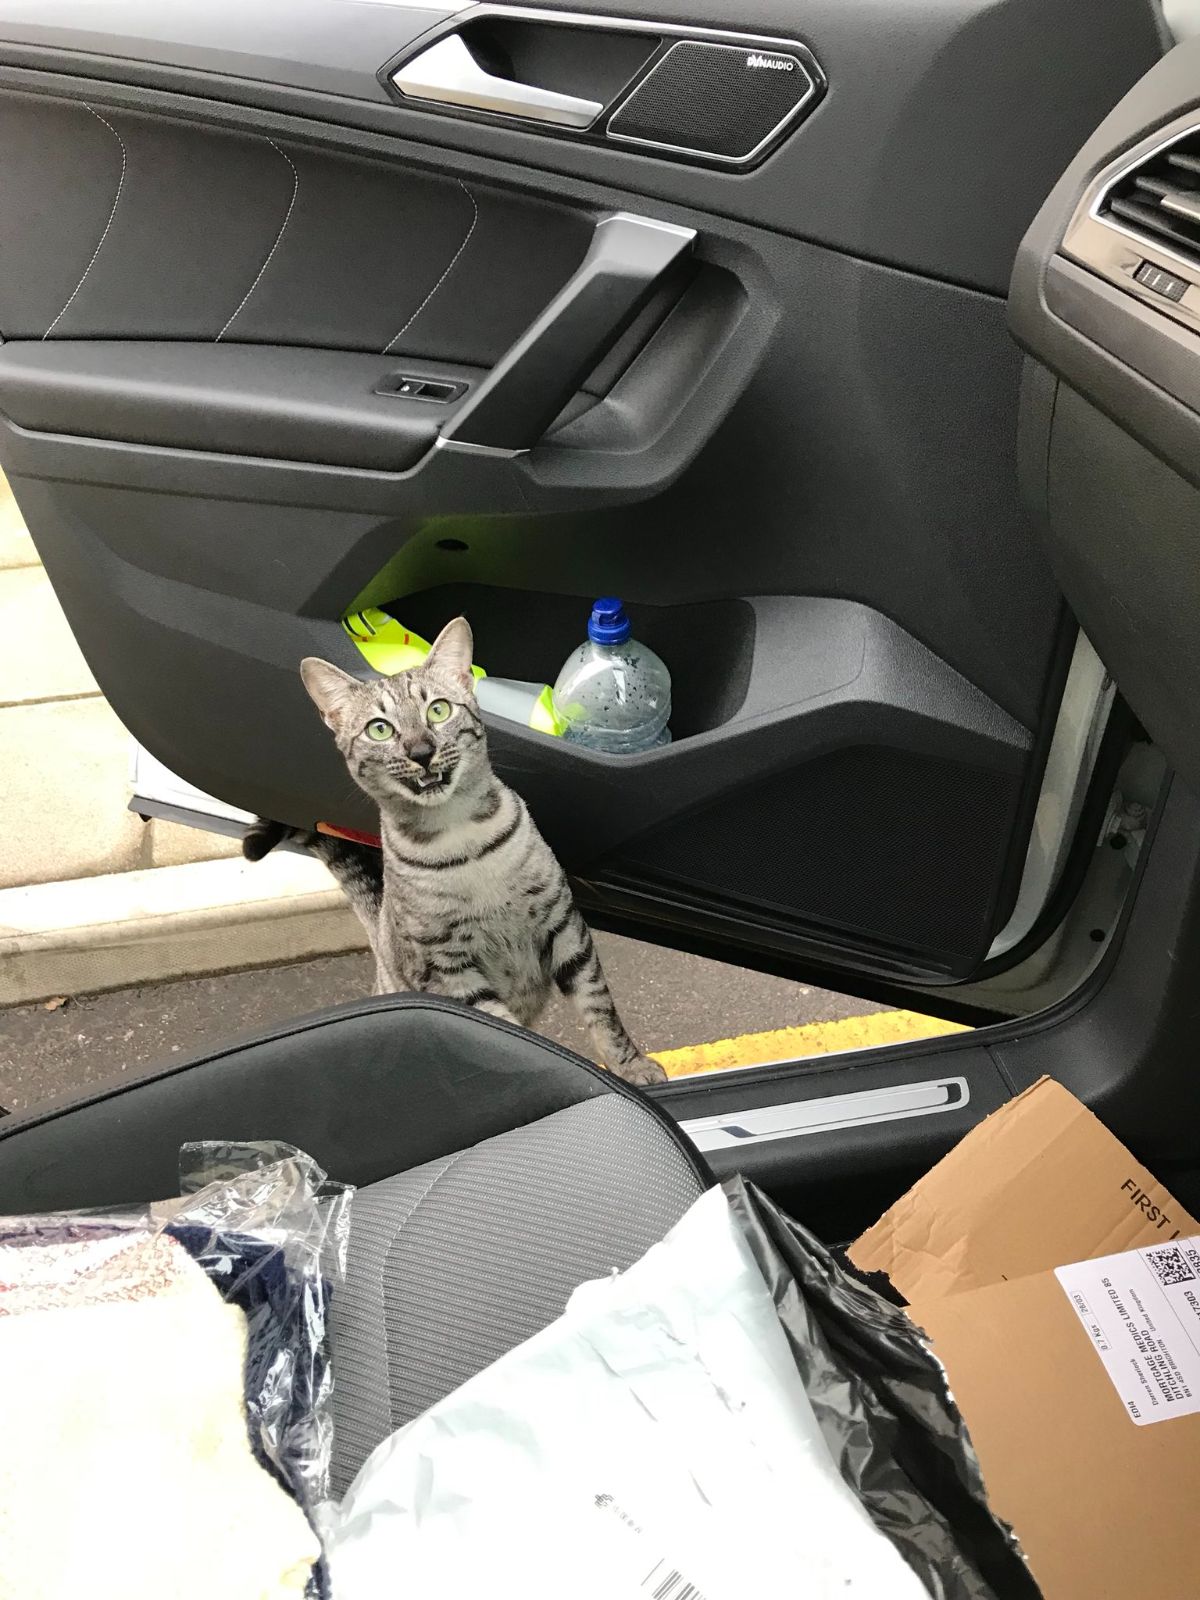 grey tabby cat standing on hind legs peeking into a vehicle with the passenger door open